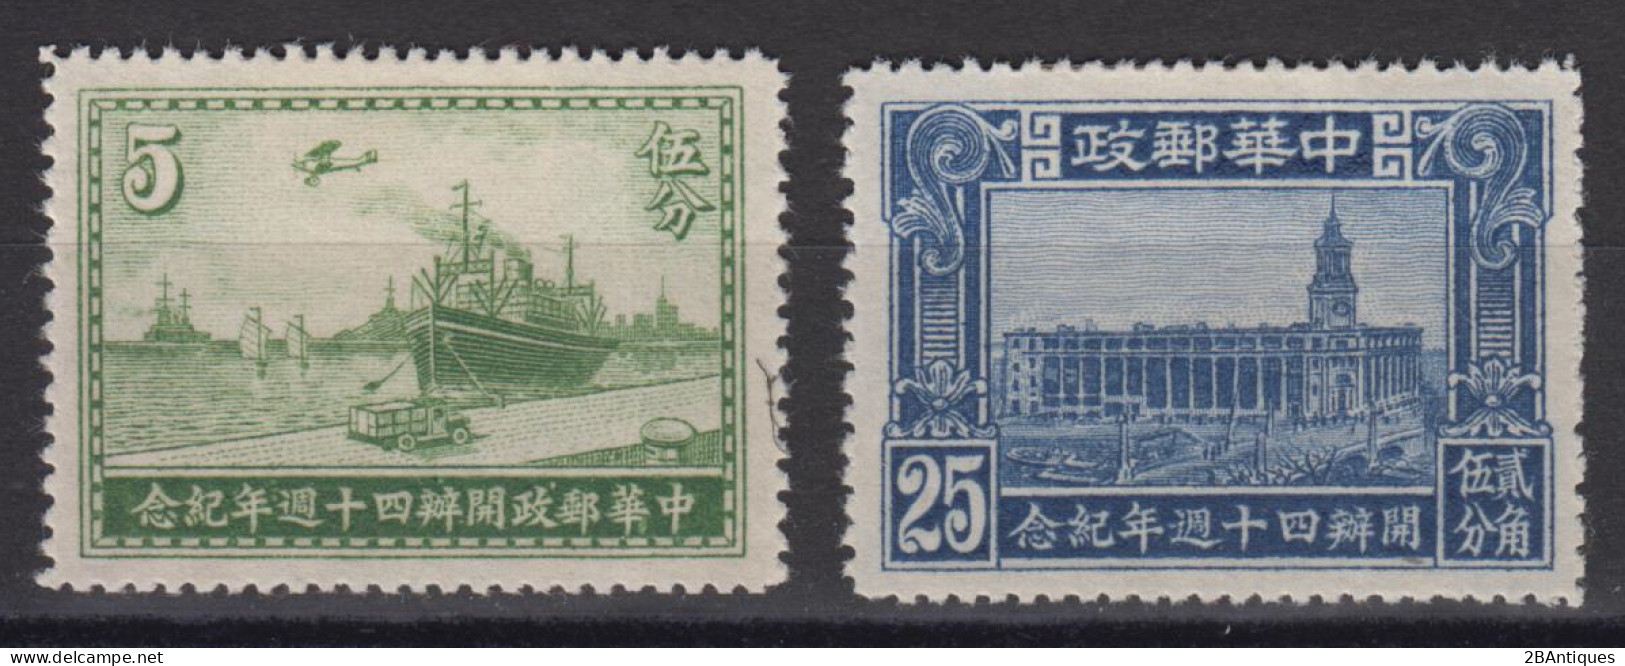 CHINA 1936 - The 40th Anniversary Of The Postal Service MH* - 1912-1949 Republic